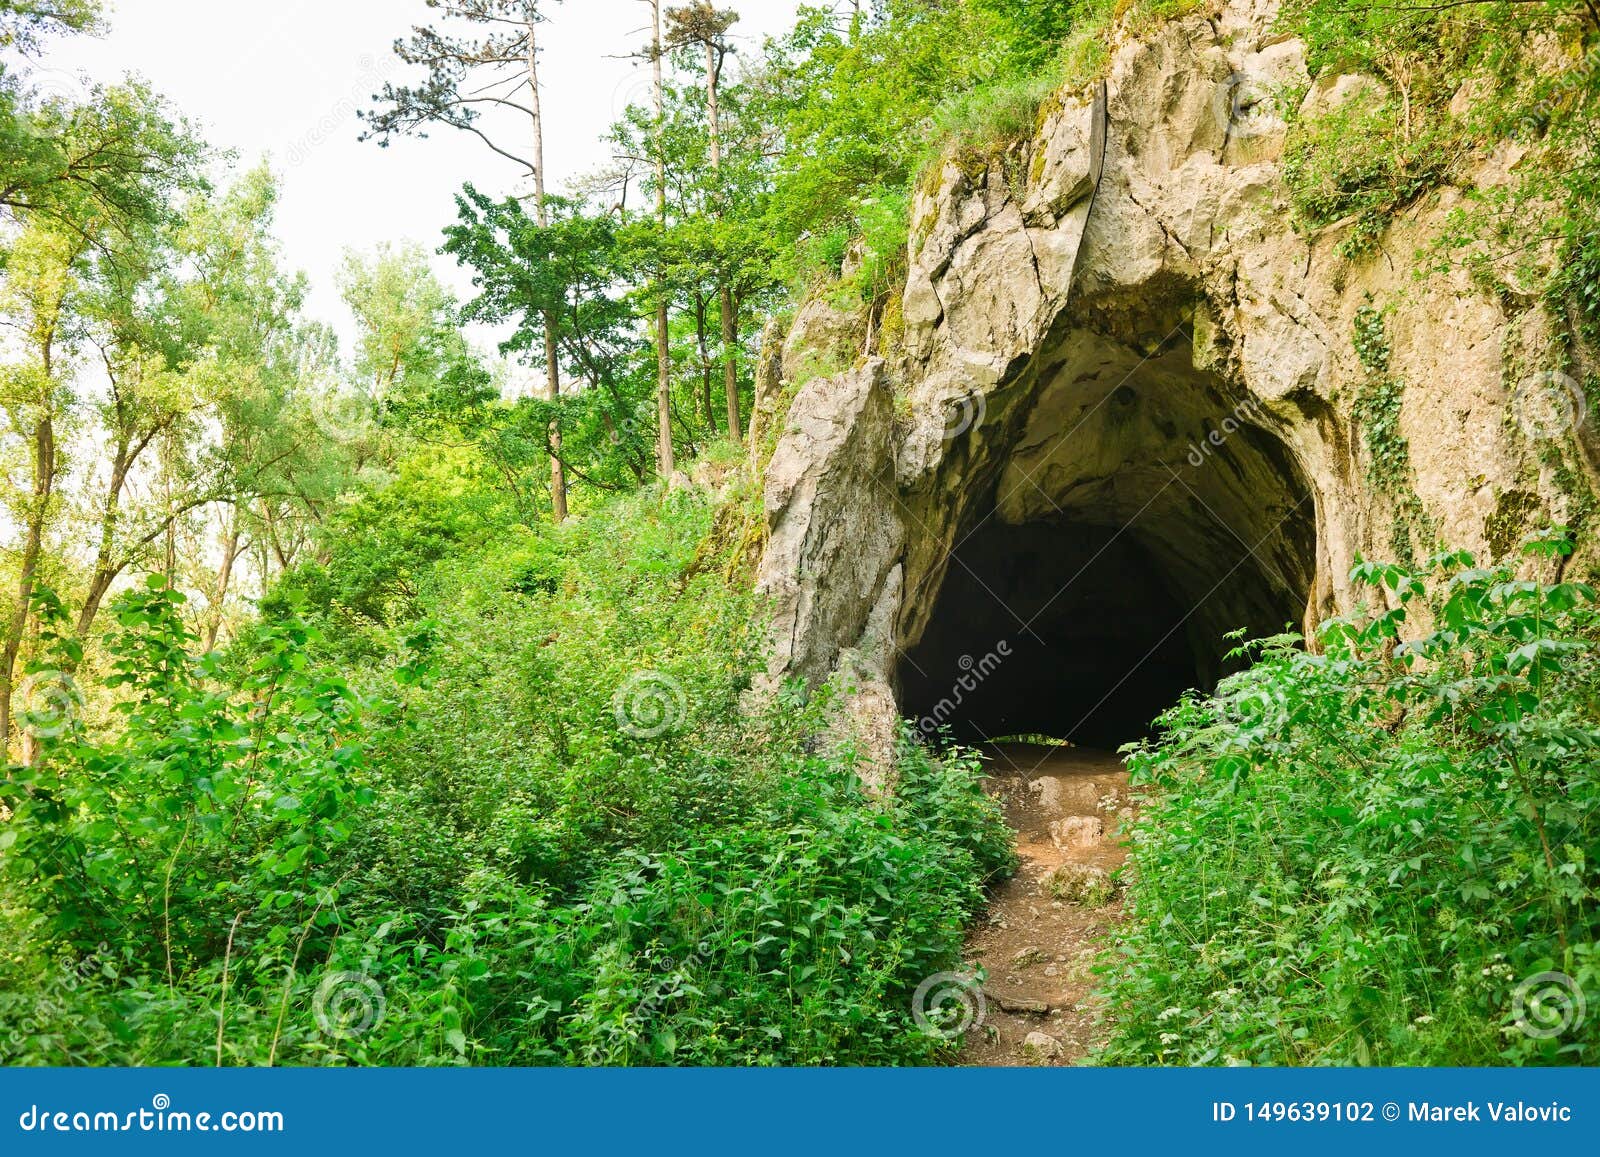 Entrance To Natural Cave In The Forrest Stock Photo Image Of Dark